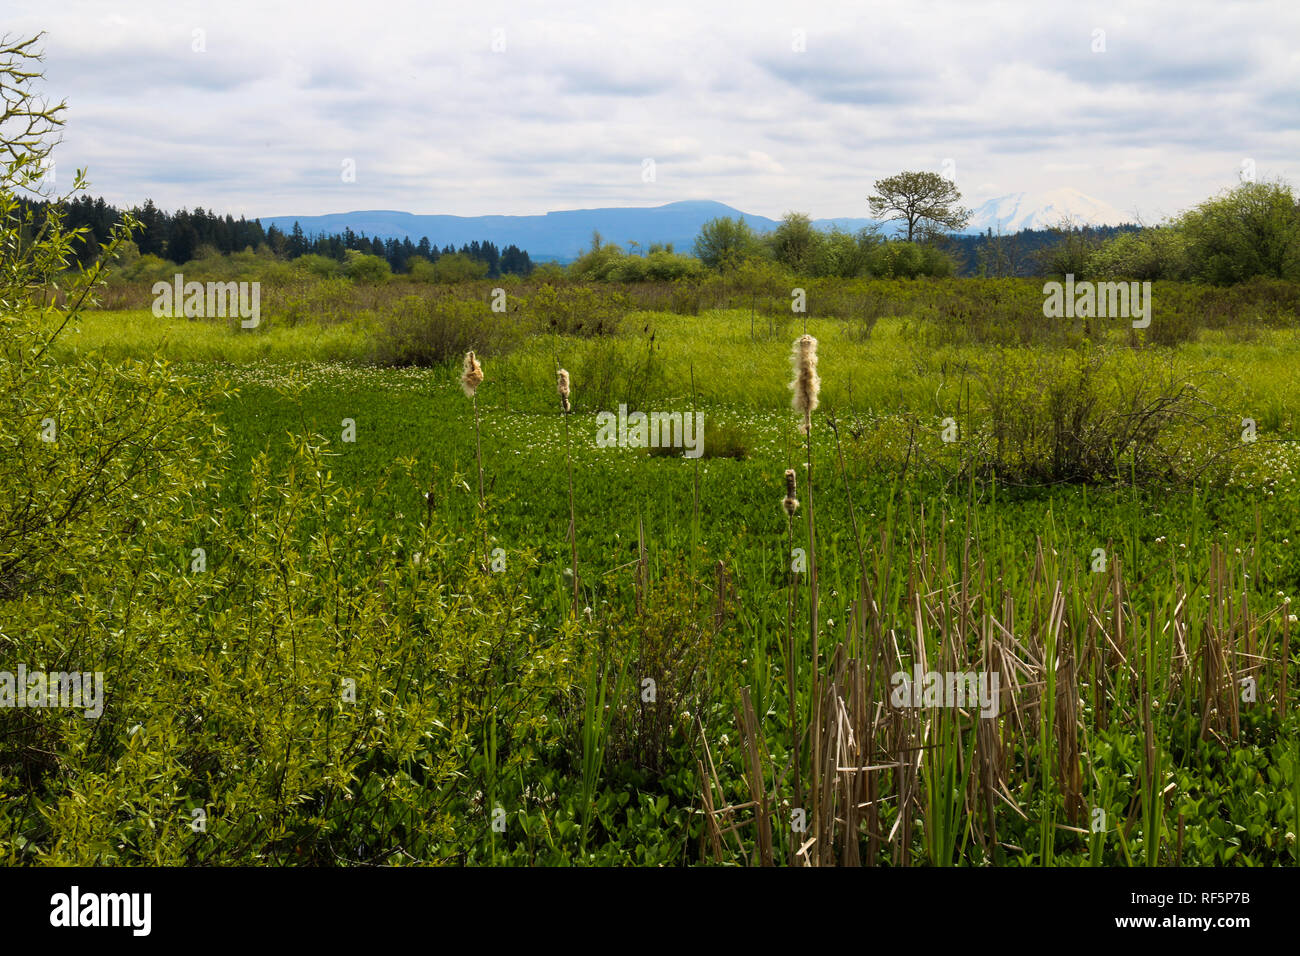 Mount St Helens National Volcanic Monument Coldwater Lake grassy area dense with overgrowth Stock Photo